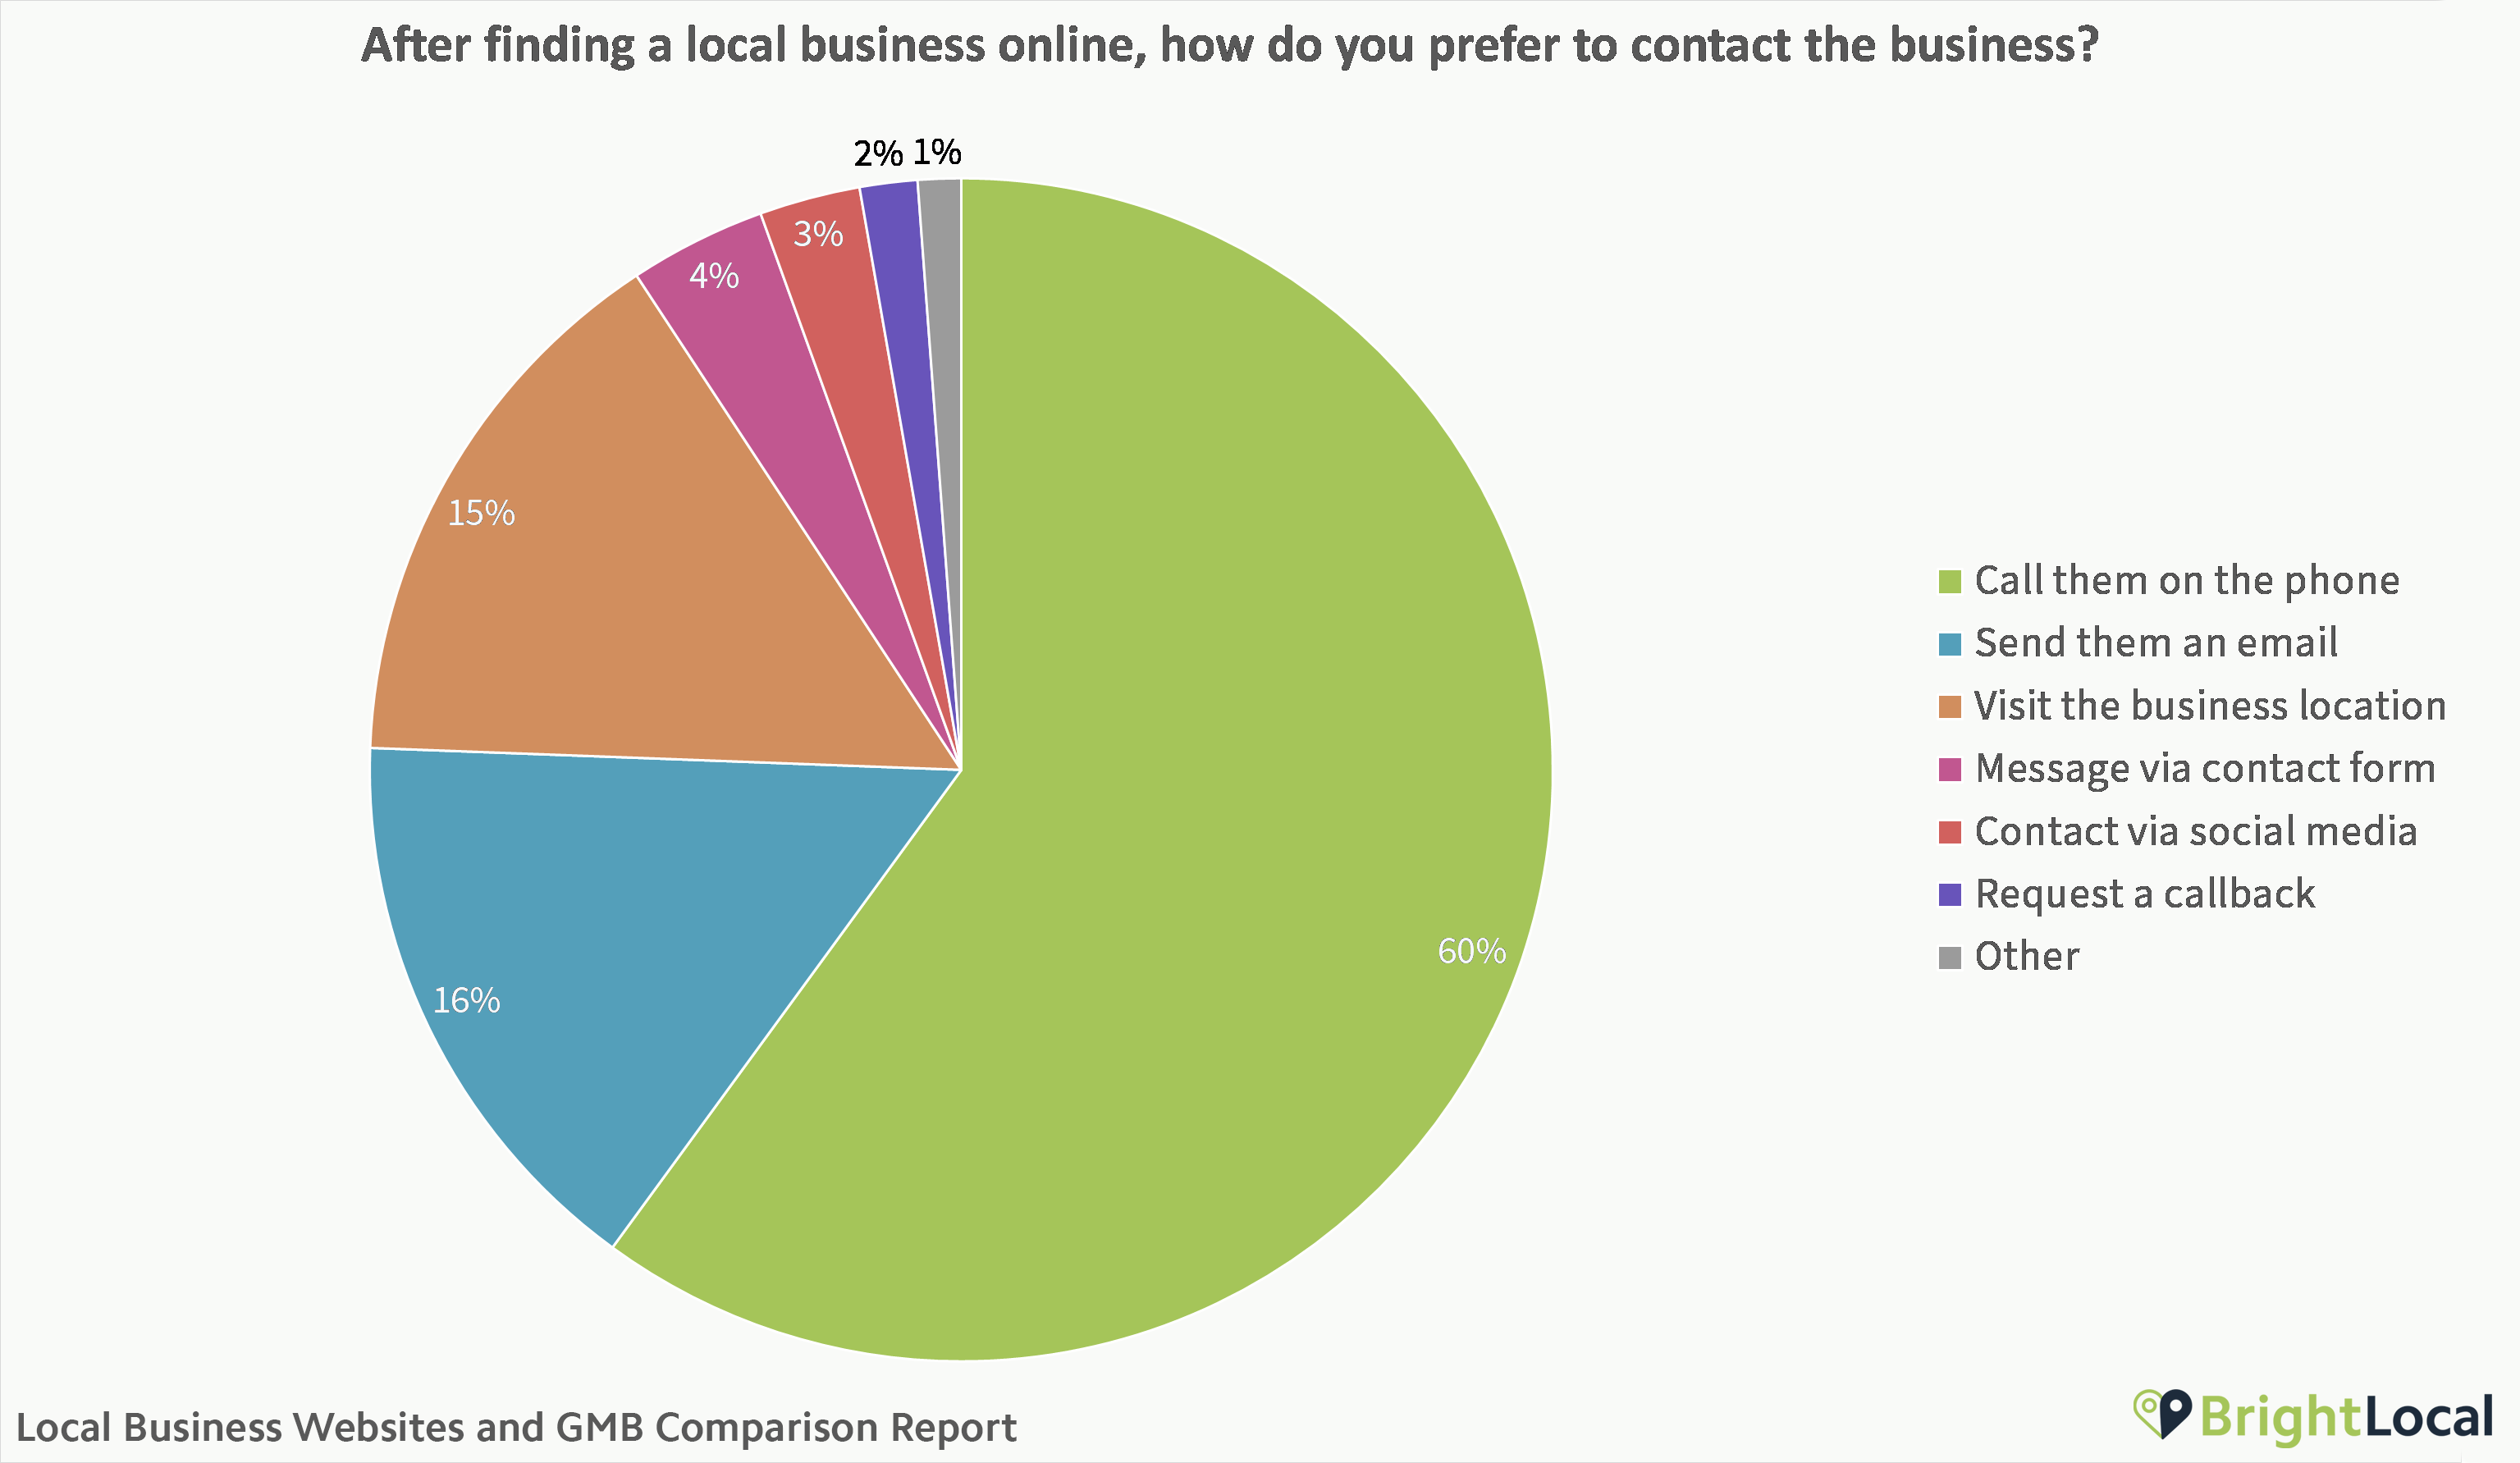 Pie chart showing the percentage of people who prefer to contact a business via different methods